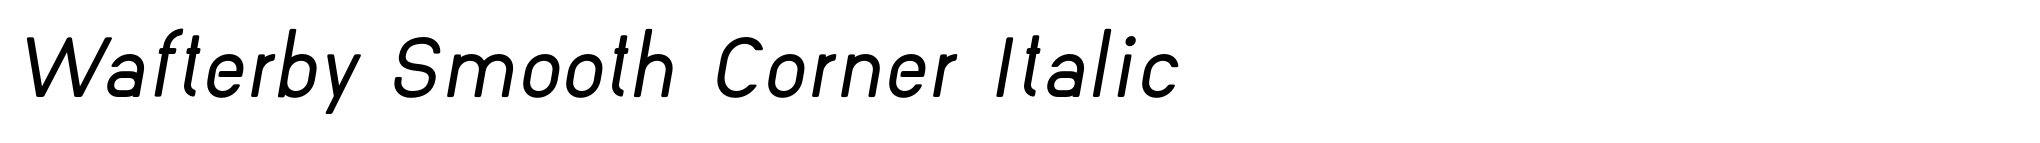 Wafterby Smooth Corner Italic image